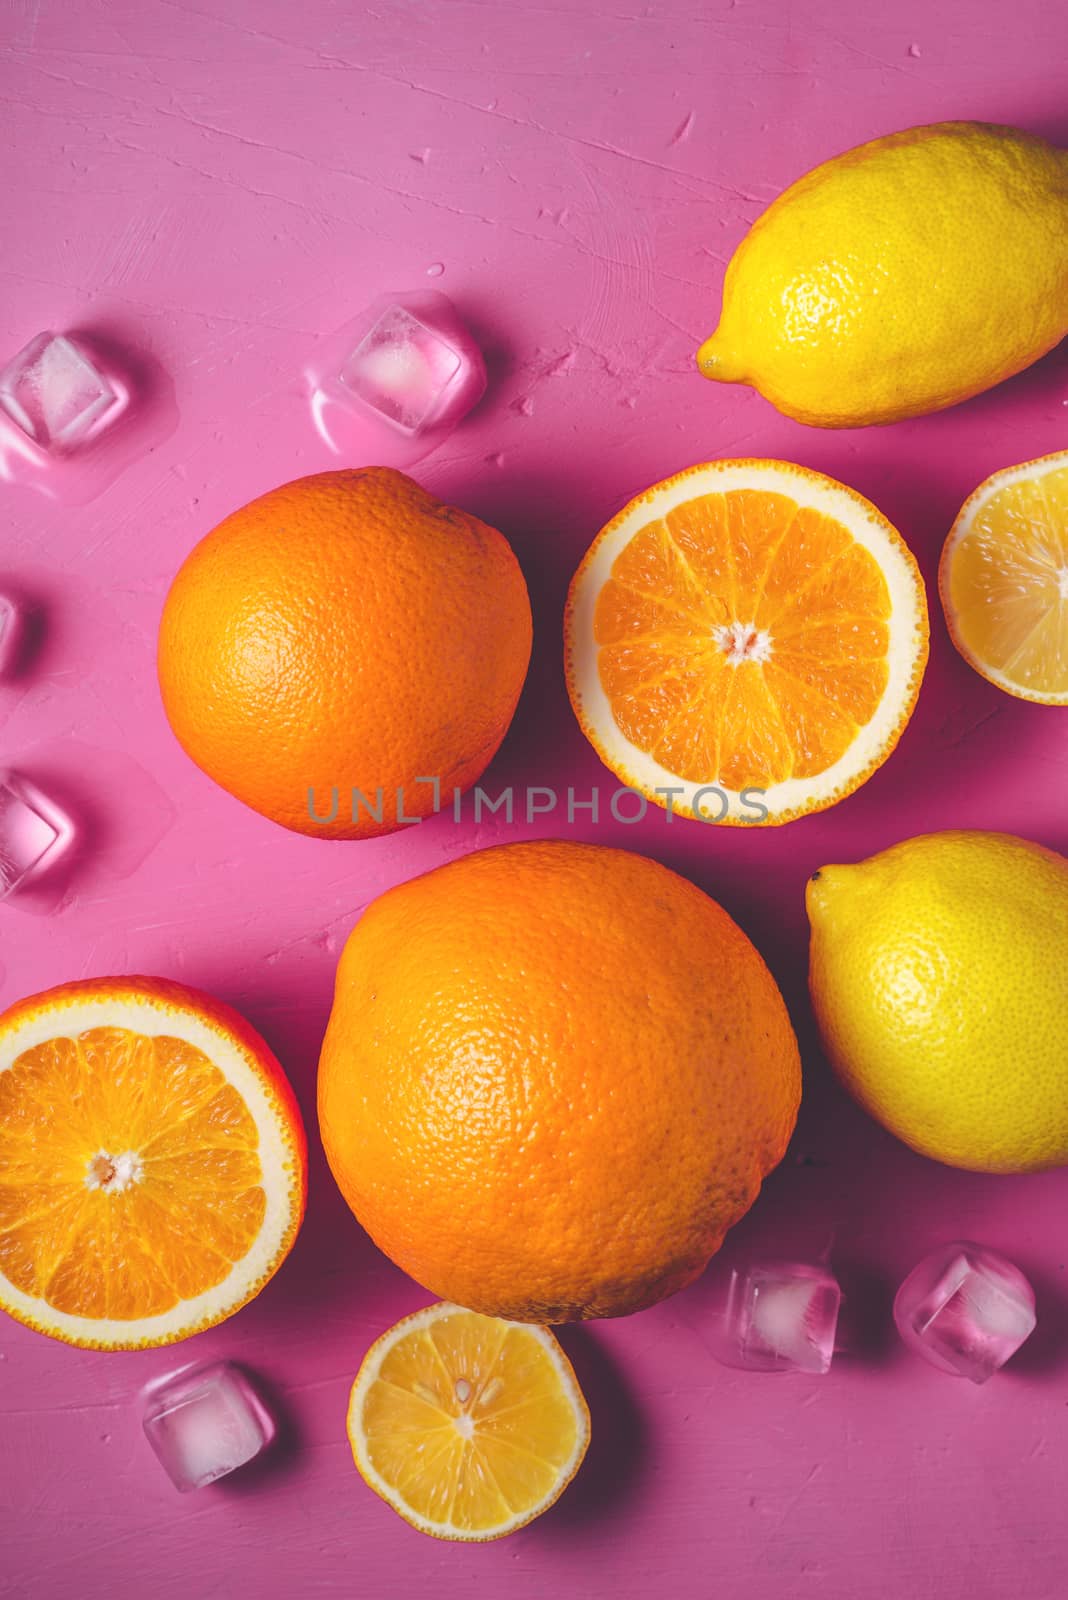 Citrus mix on the bright pink background top view by Deniskarpenkov